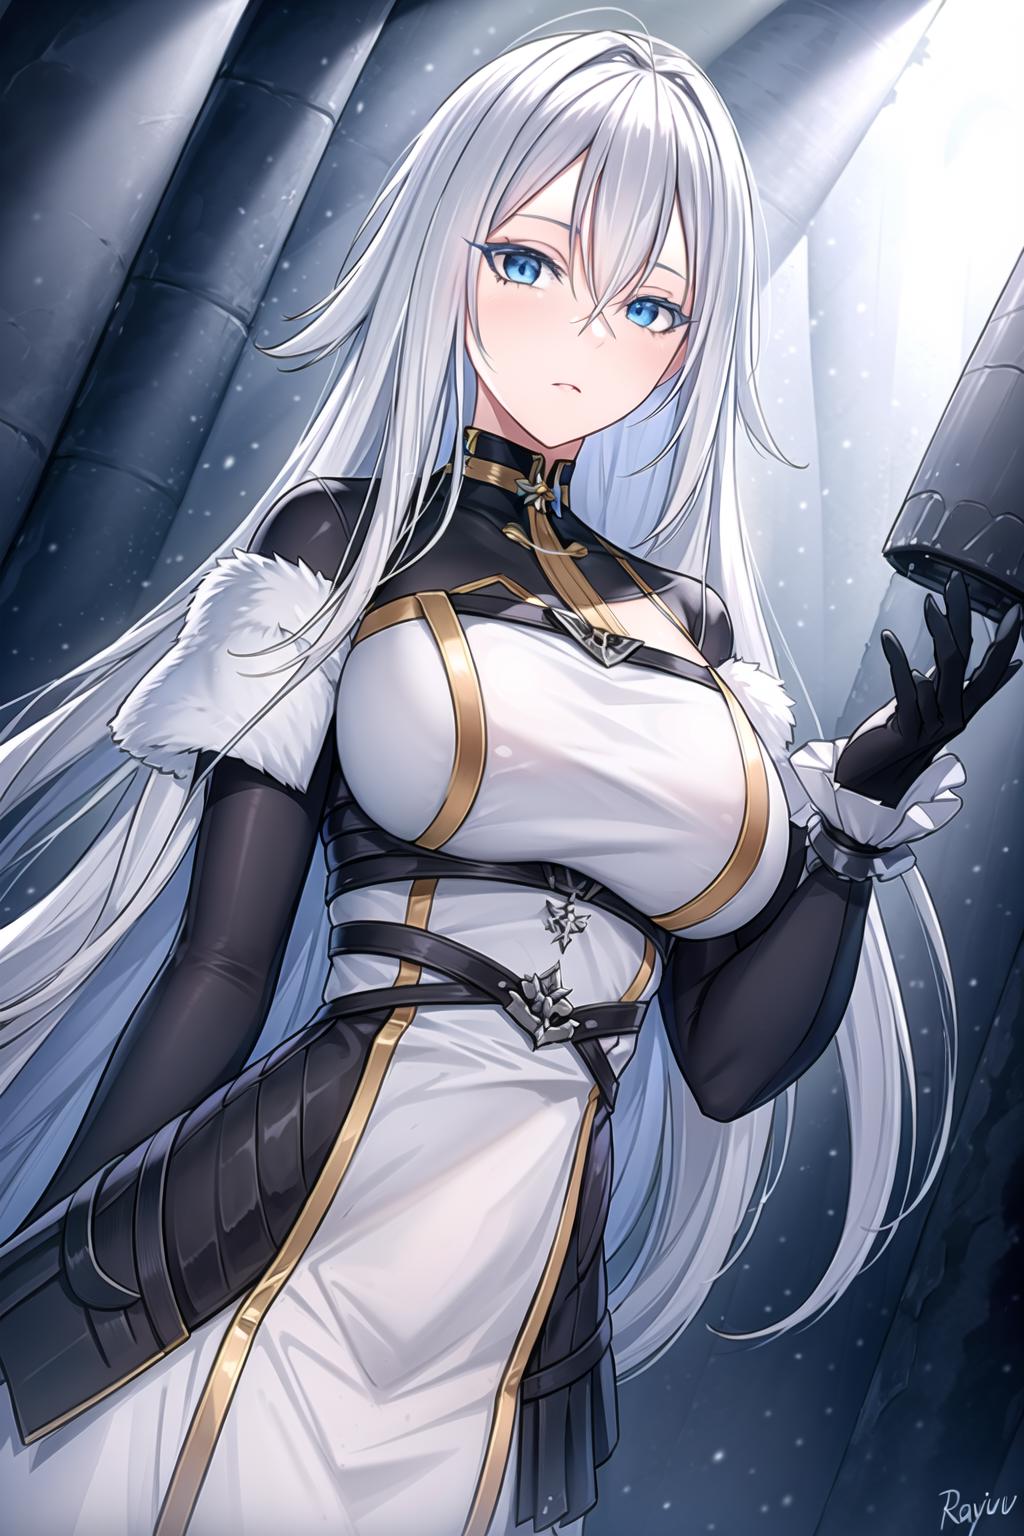 [SN] Sovetsky Soyuz - Leader of the Northern Parliament | Azur Lane | LoRA image by L115A4